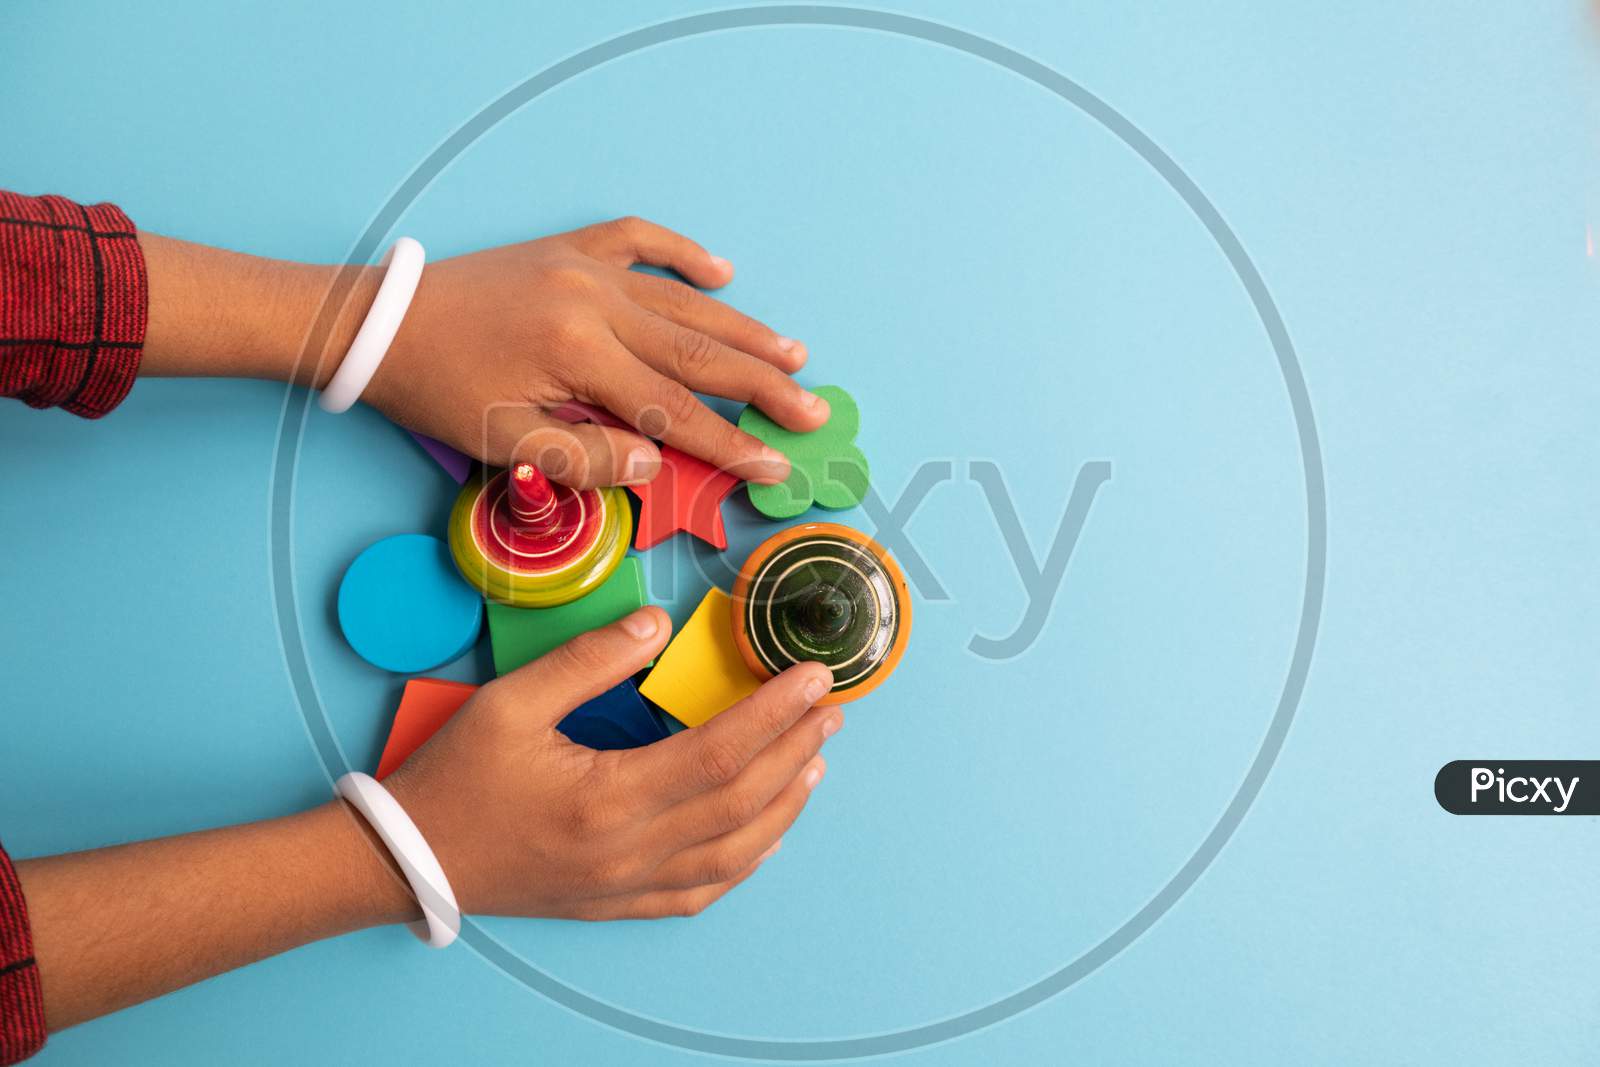 Top View Of Hand Of A Children Grabbing Colorful Wooden Building Blocks With Different Shapes For Playing Of Children On Blue Background.